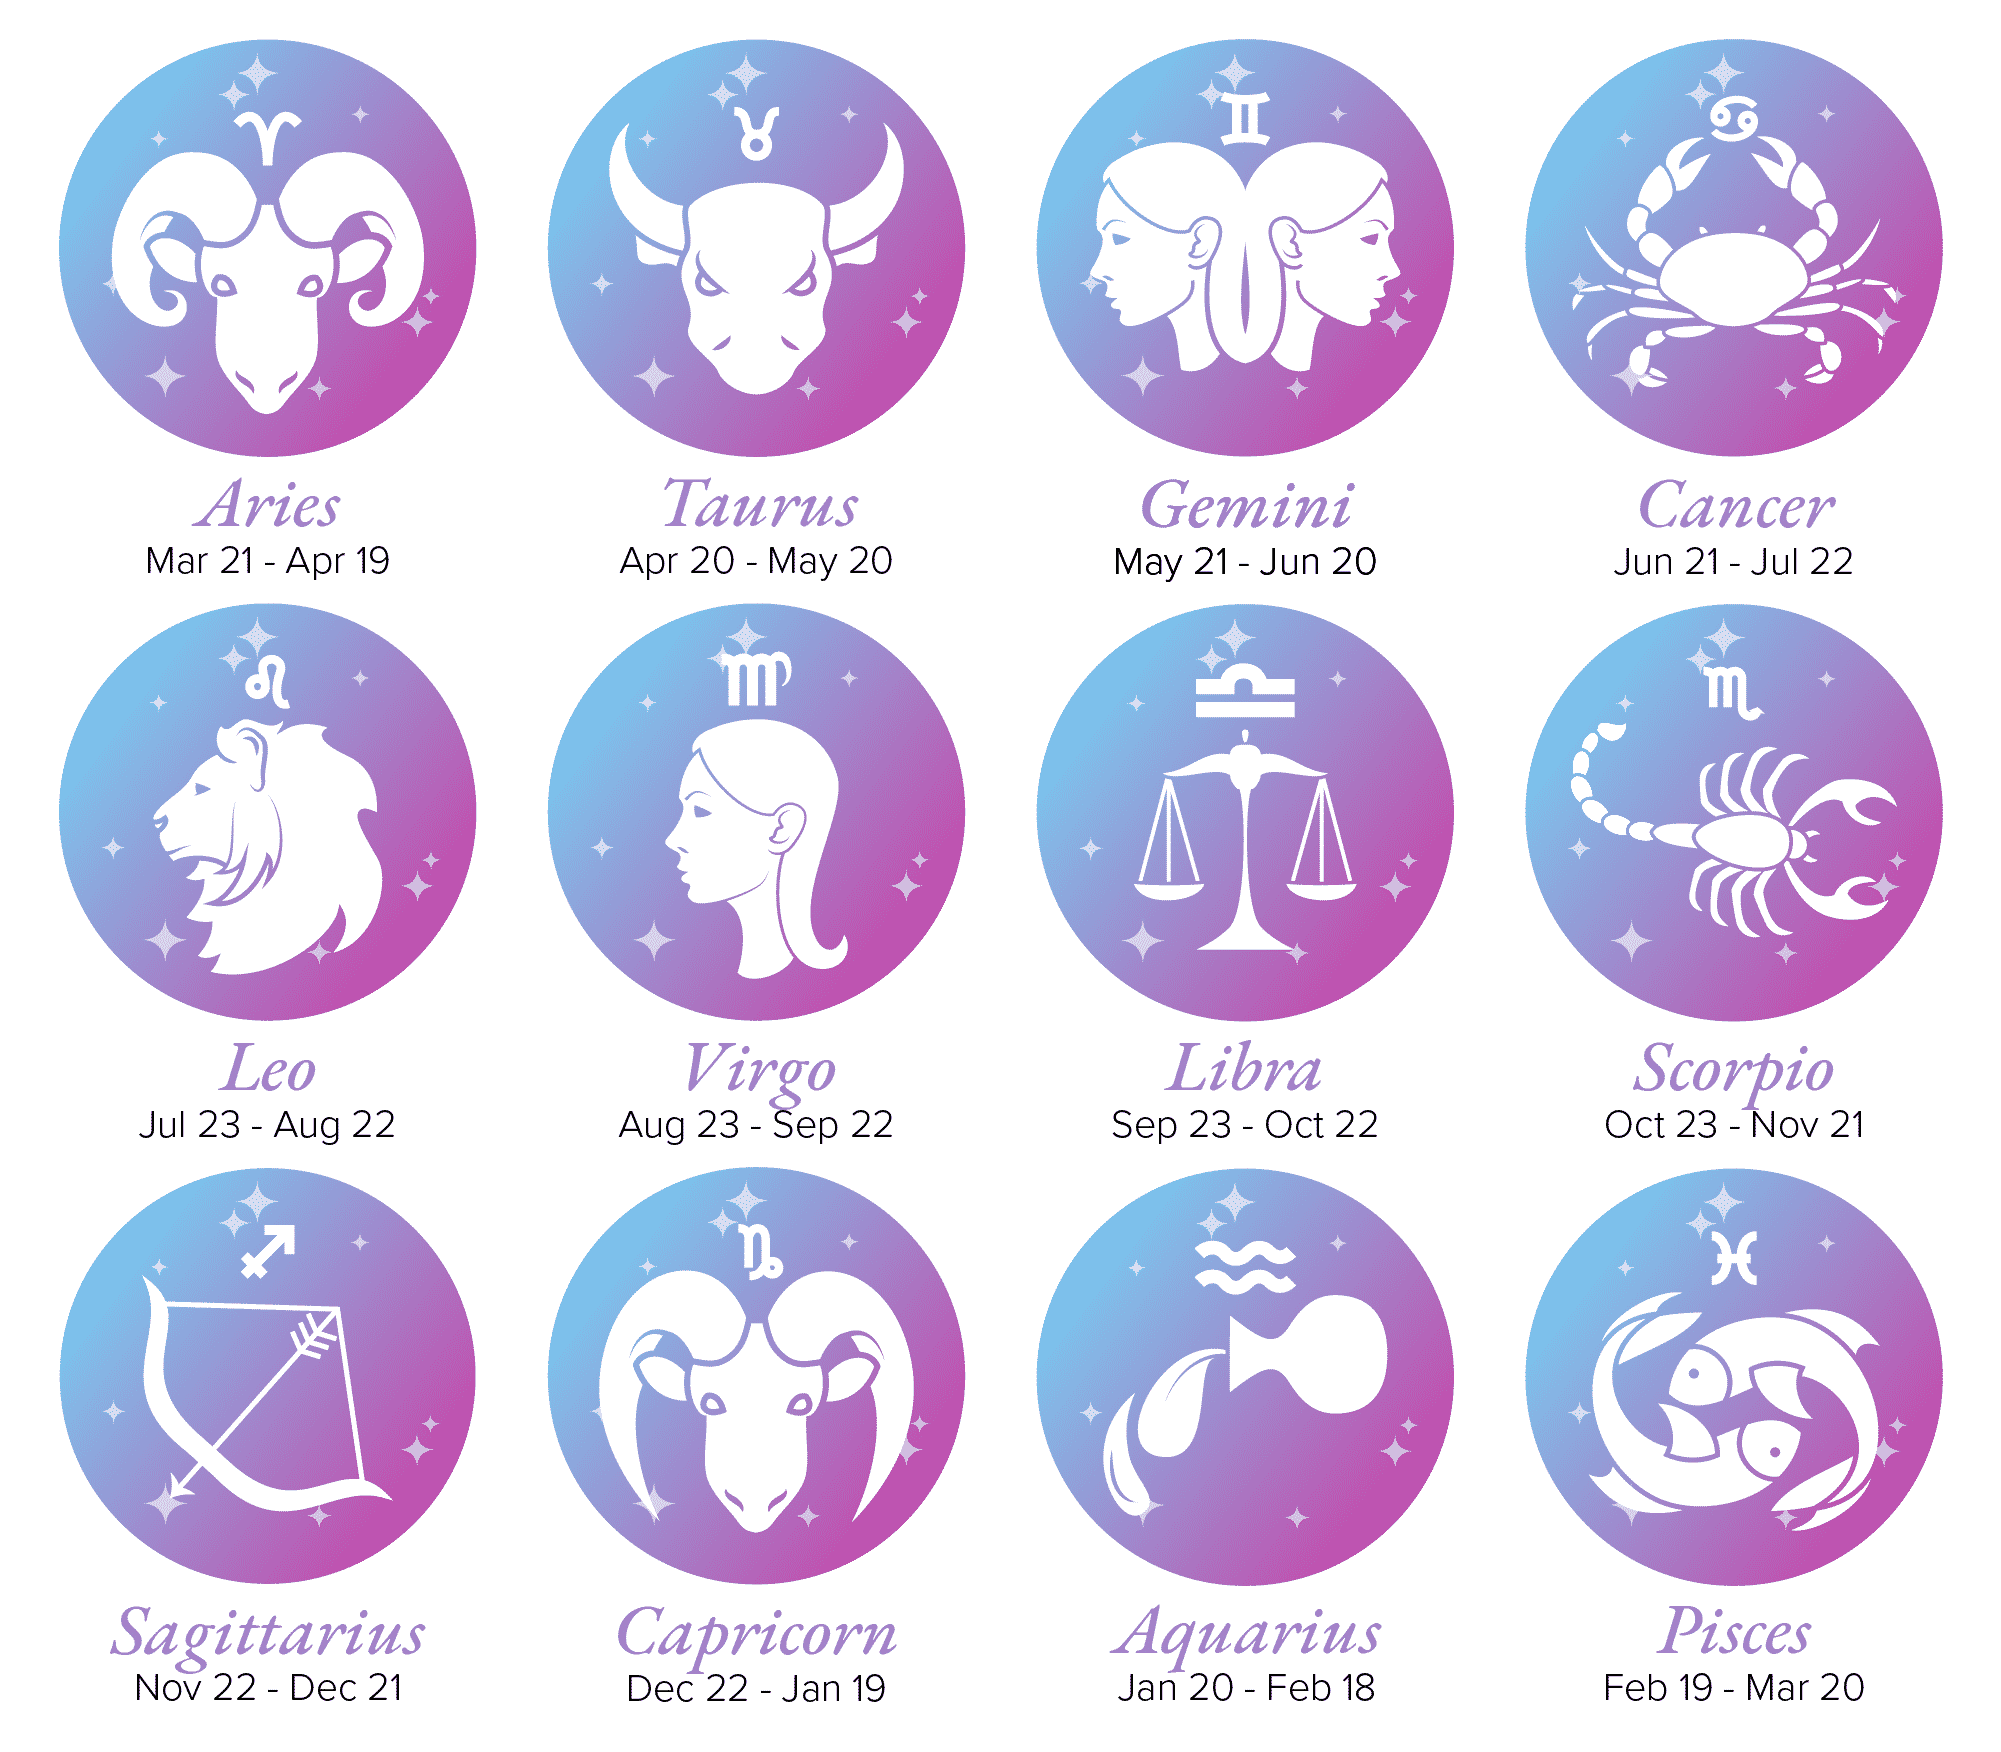 Zodiac signs meant for each other